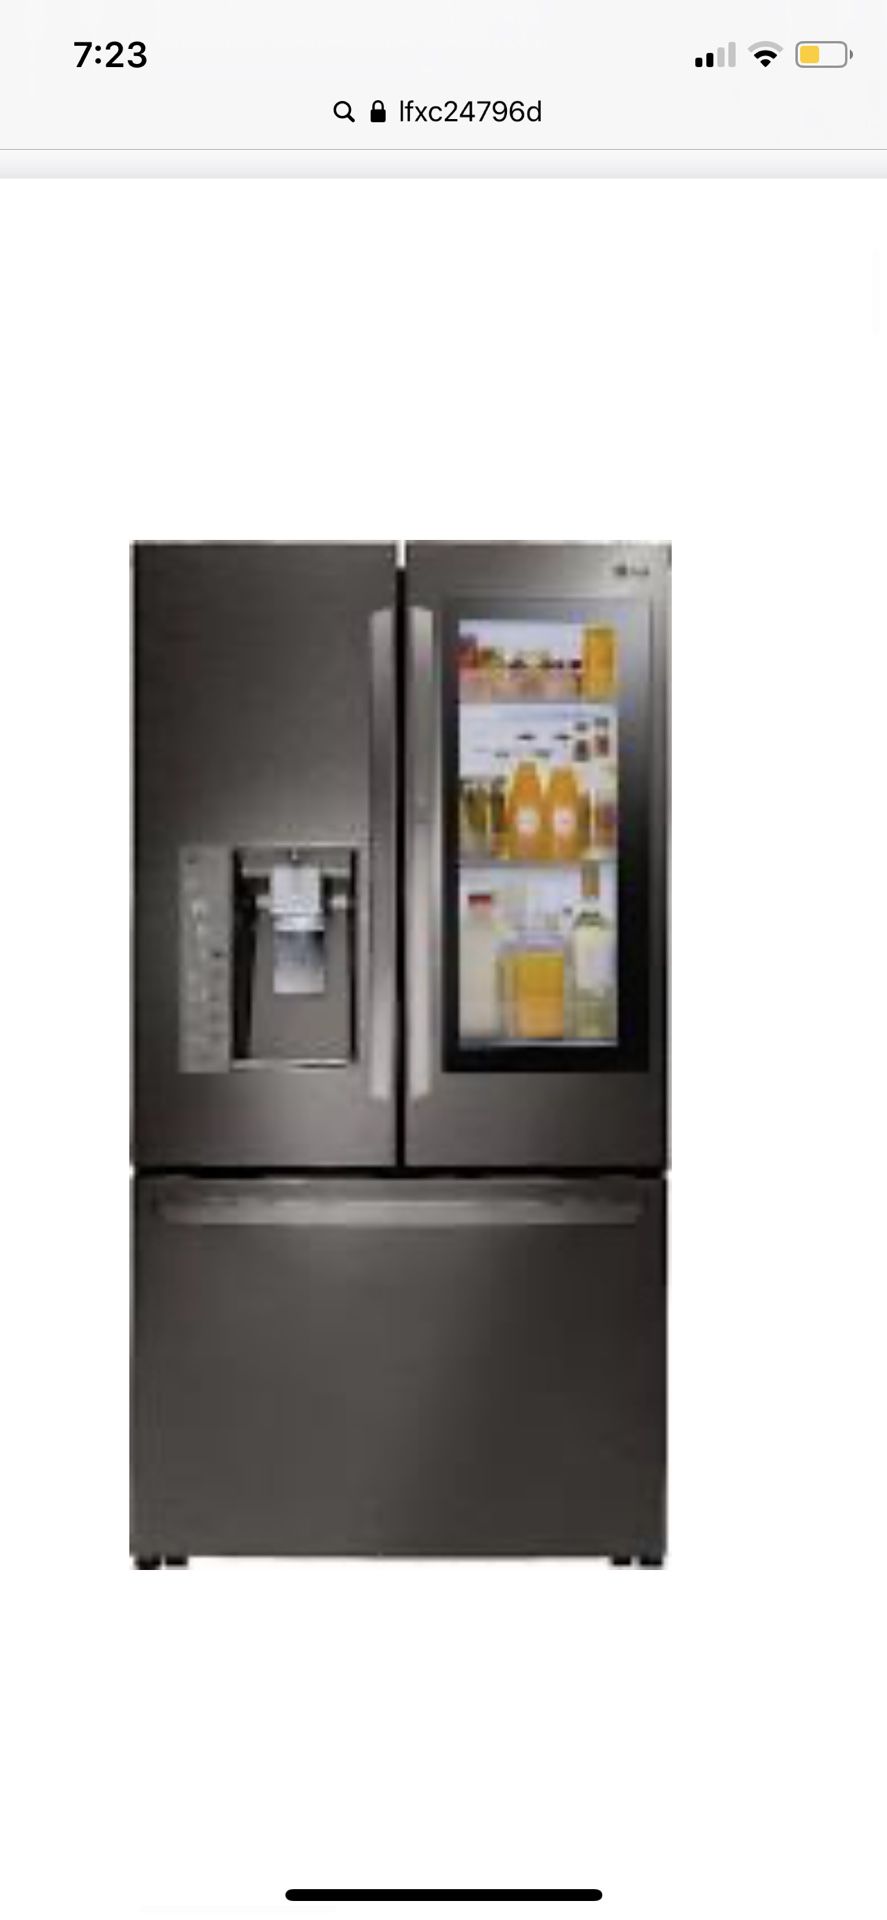 Smart fridge refrigerator with InstaView technology and extended warranty